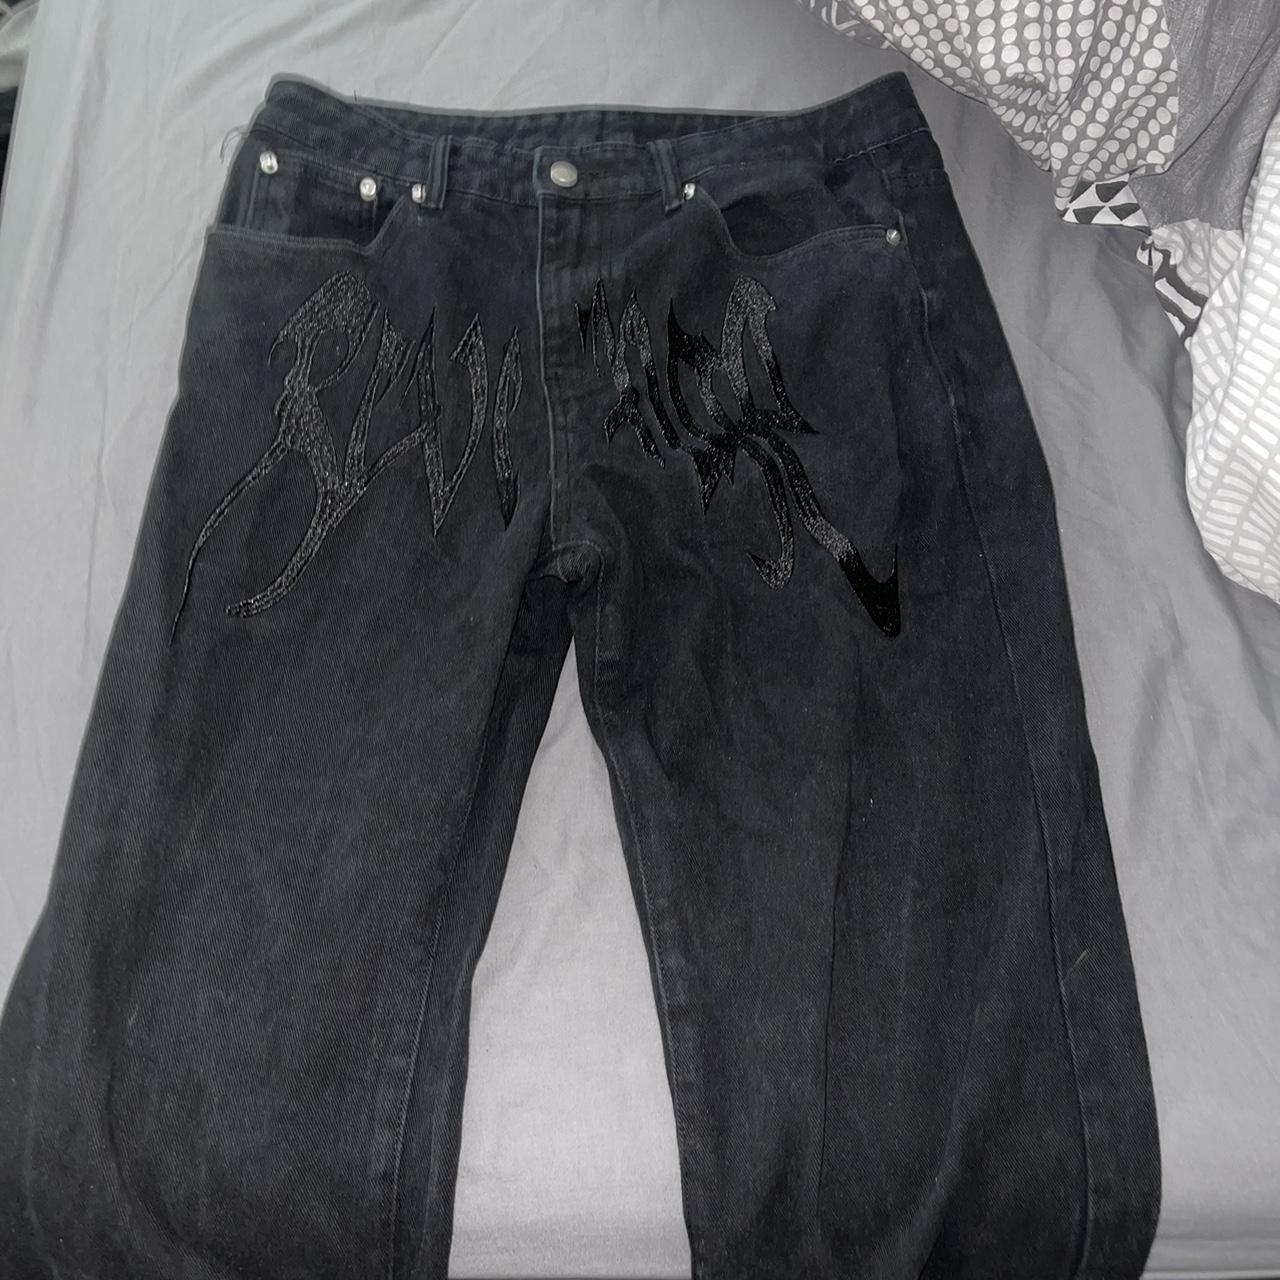 revenge baggy jeans never worn because wrong size... - Depop